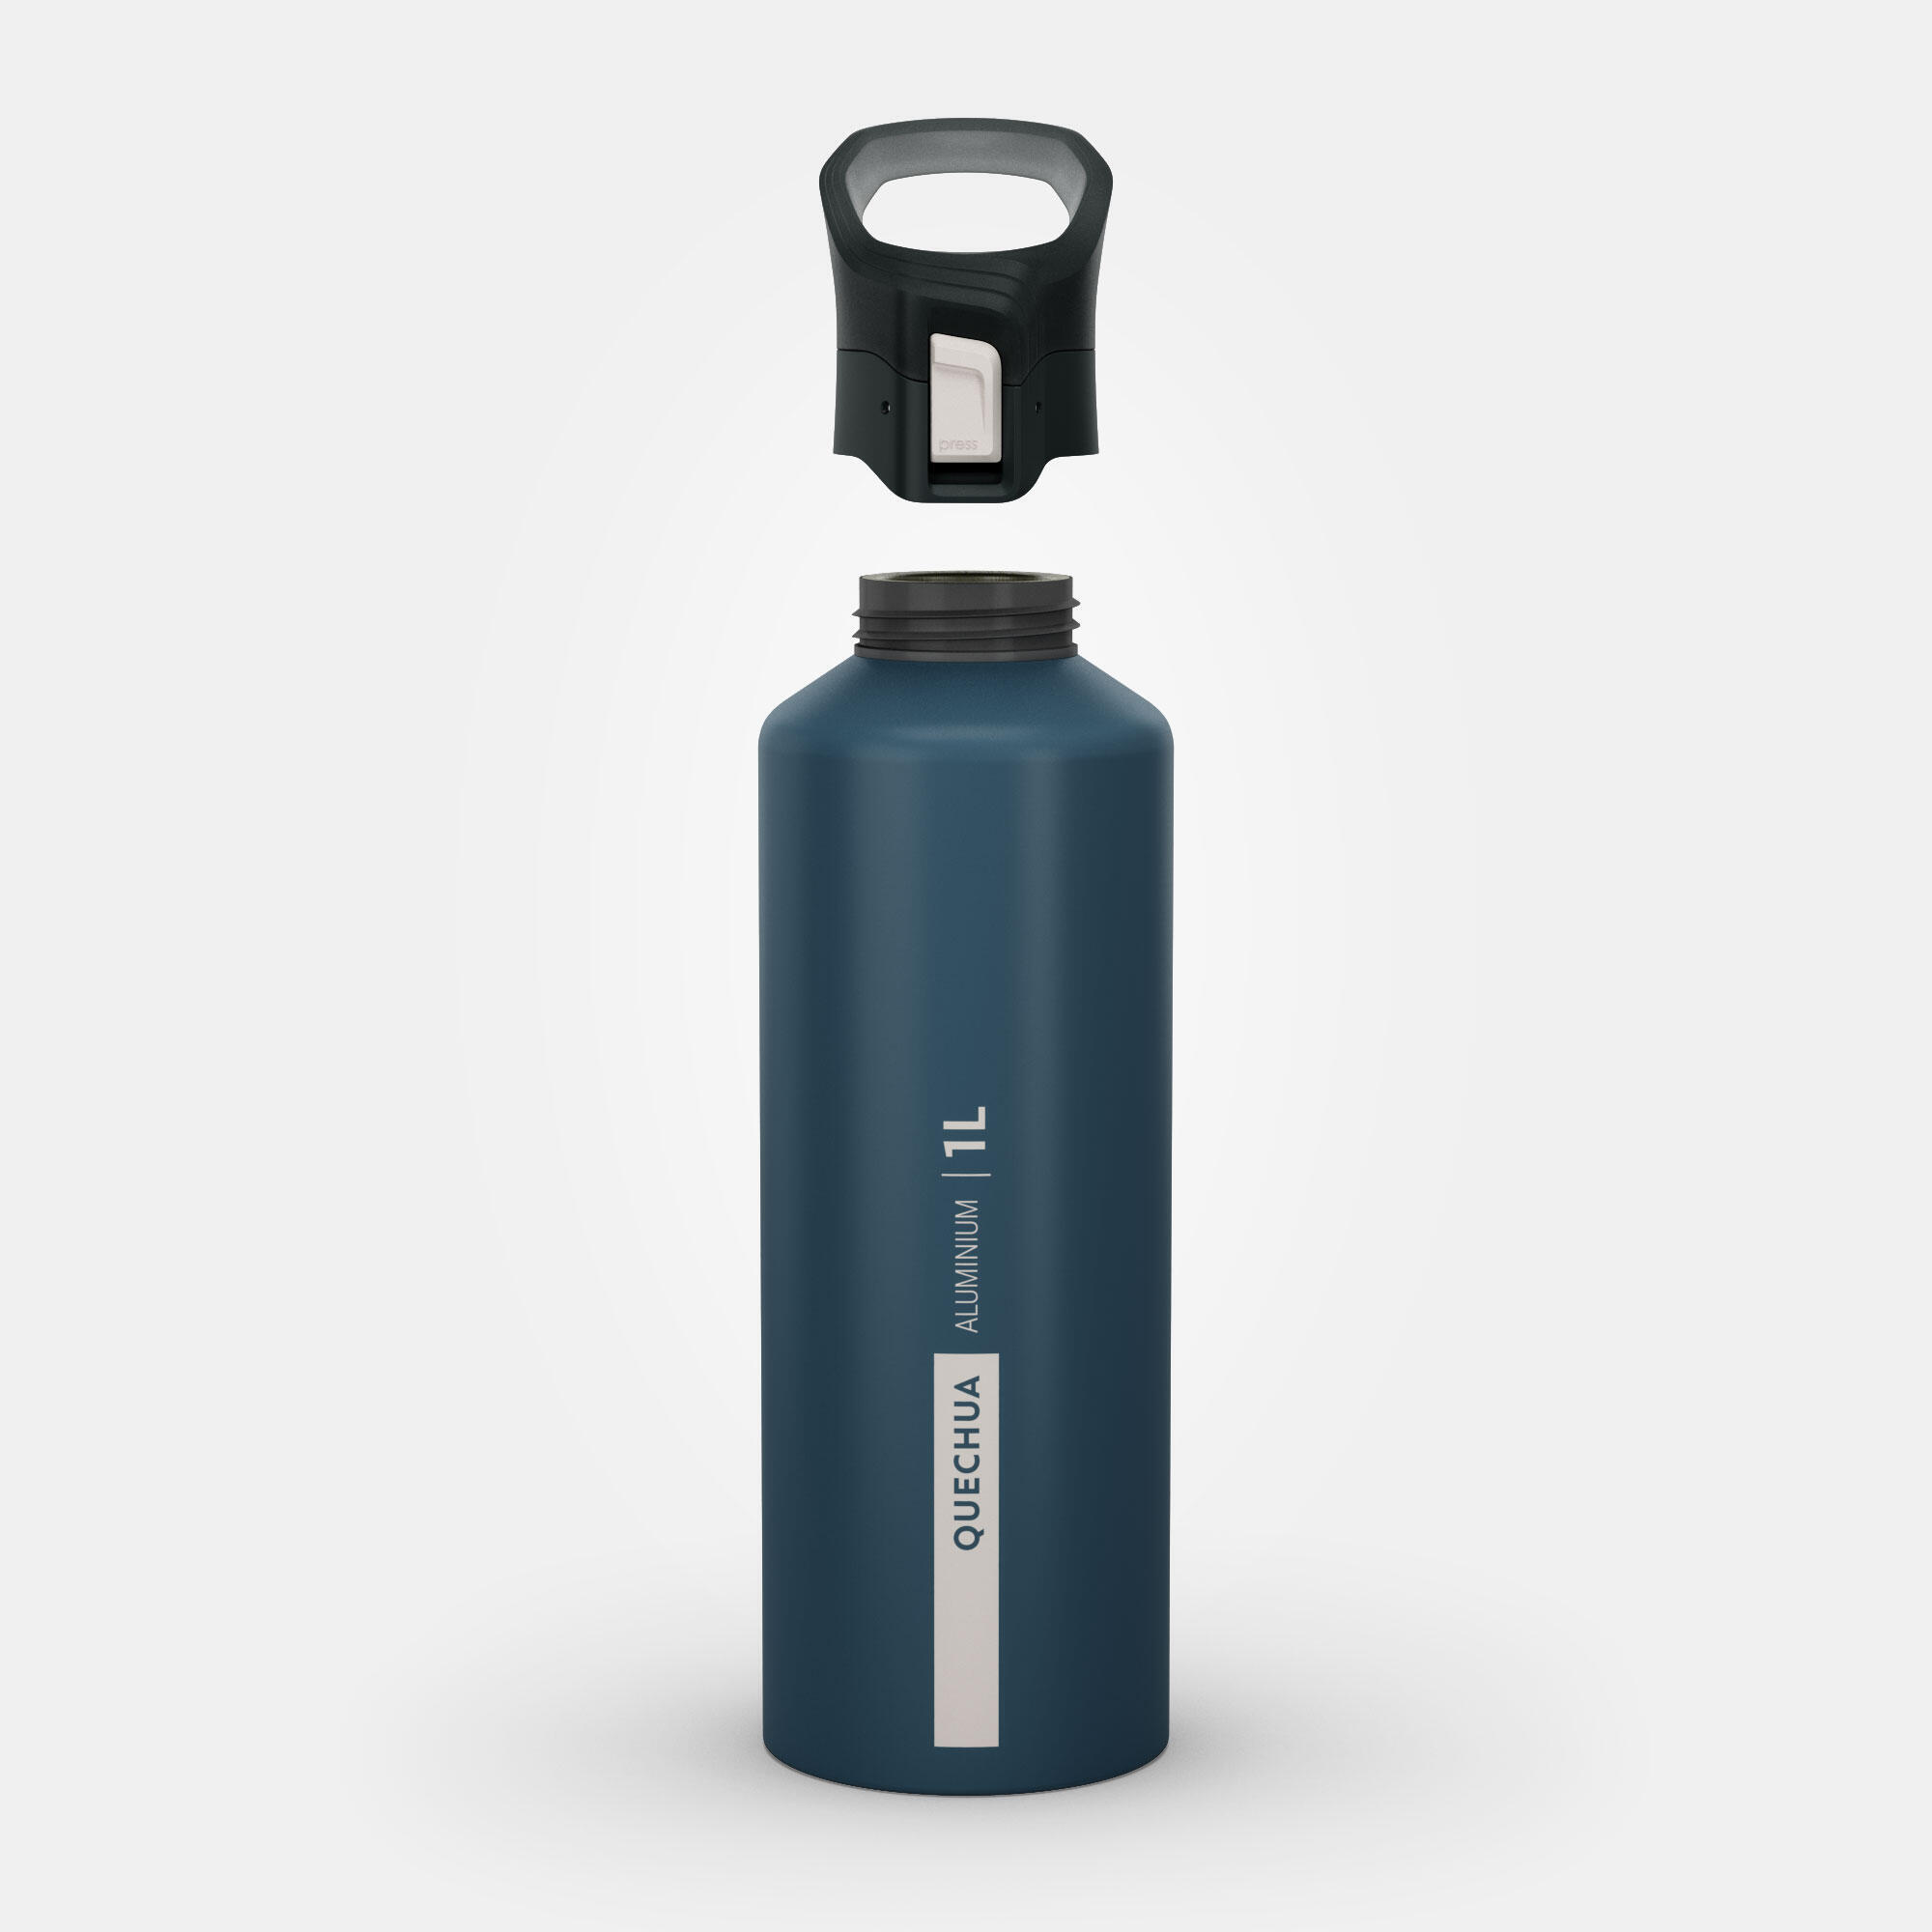 Aluminium 1 L water bottle with quick opening cap for hiking - Blue 2/10